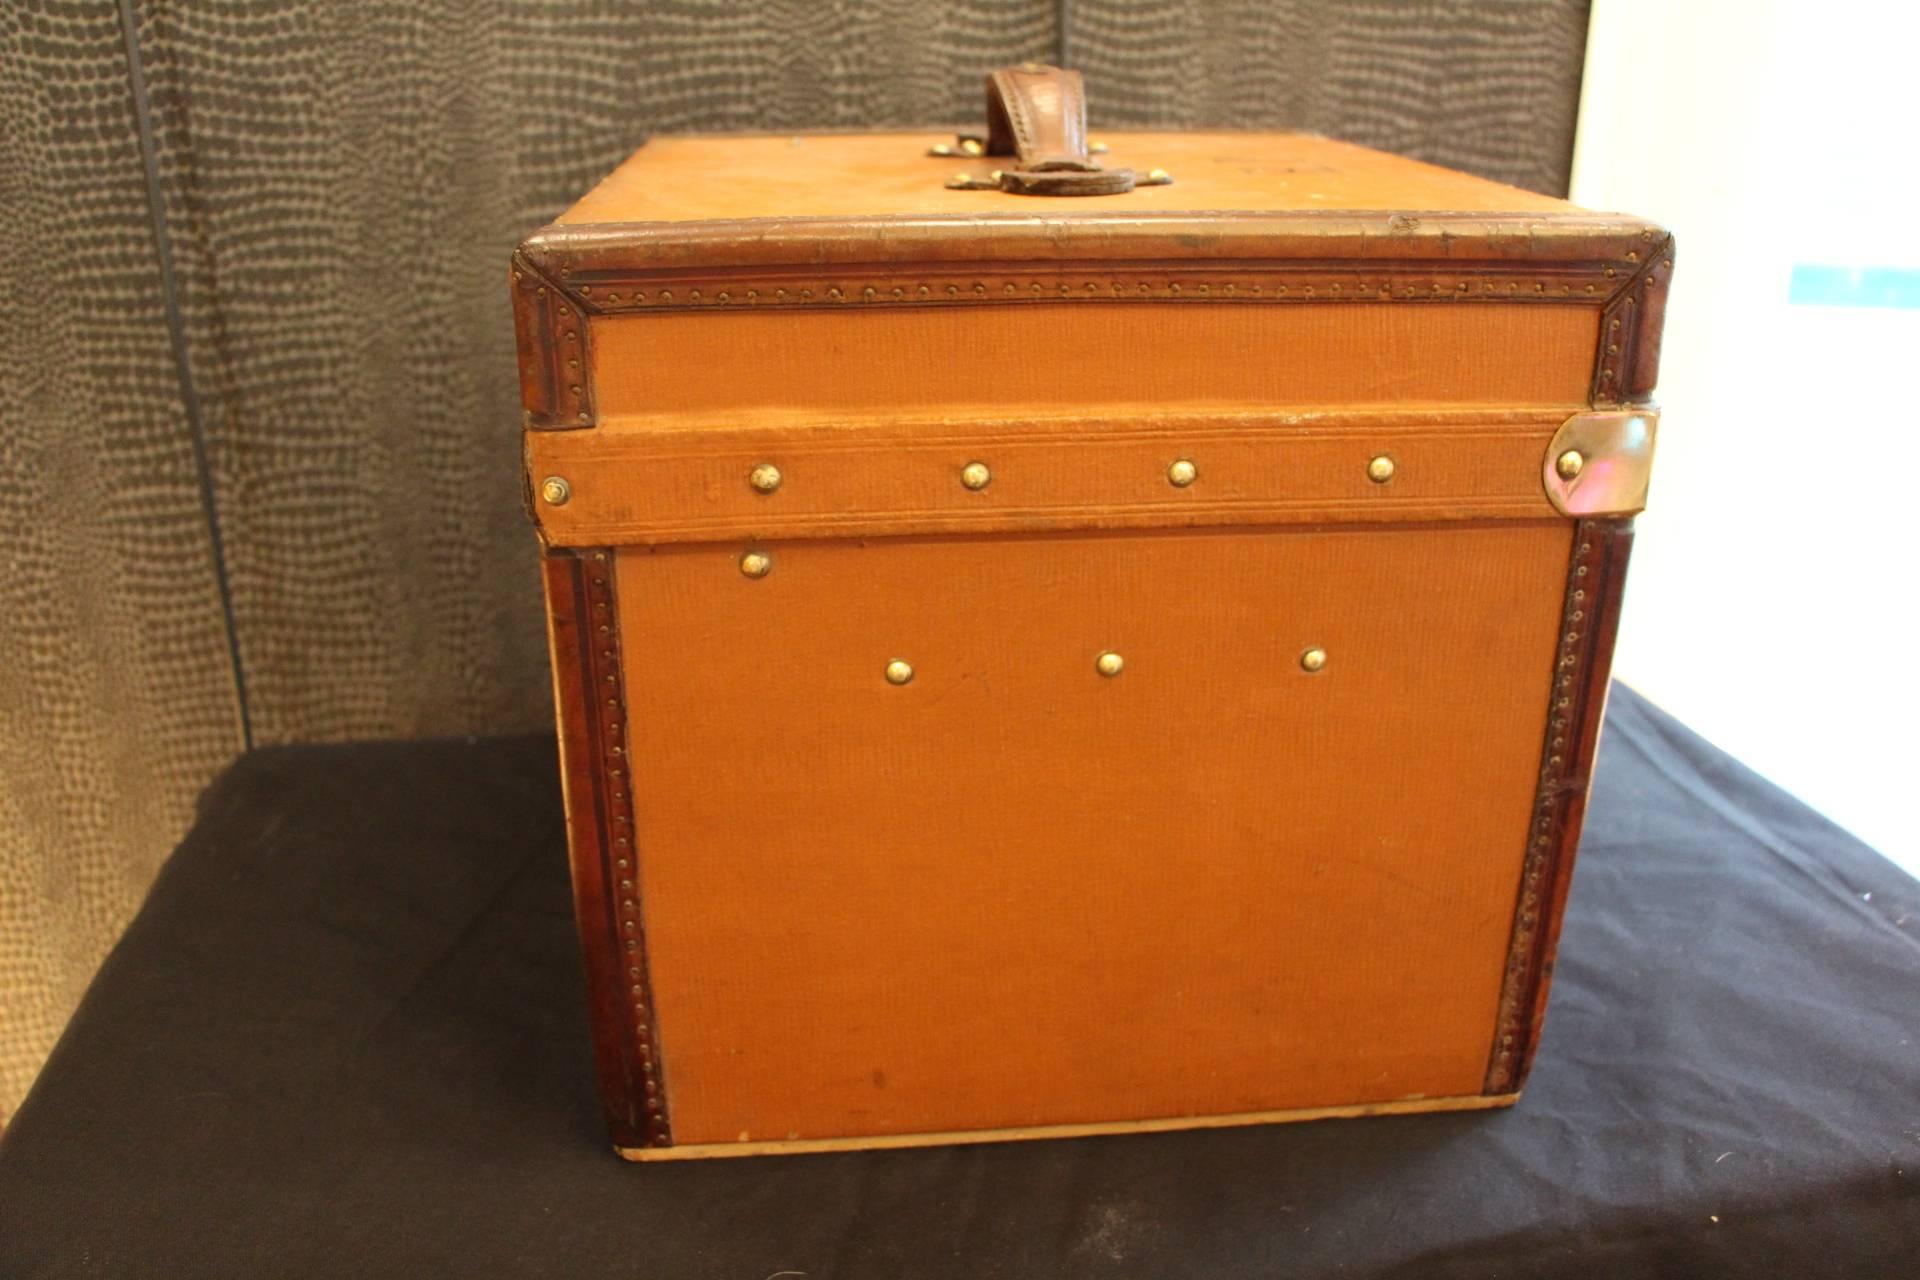 Very nice hat box featuring leather trim and top handle as well as brass corners and locks. Its interior is beige velvet and linen, all original.
Maker's plaque: Malle de Llion, 24 boulevard des Capucines, Paris.
Clean interior, convenient for